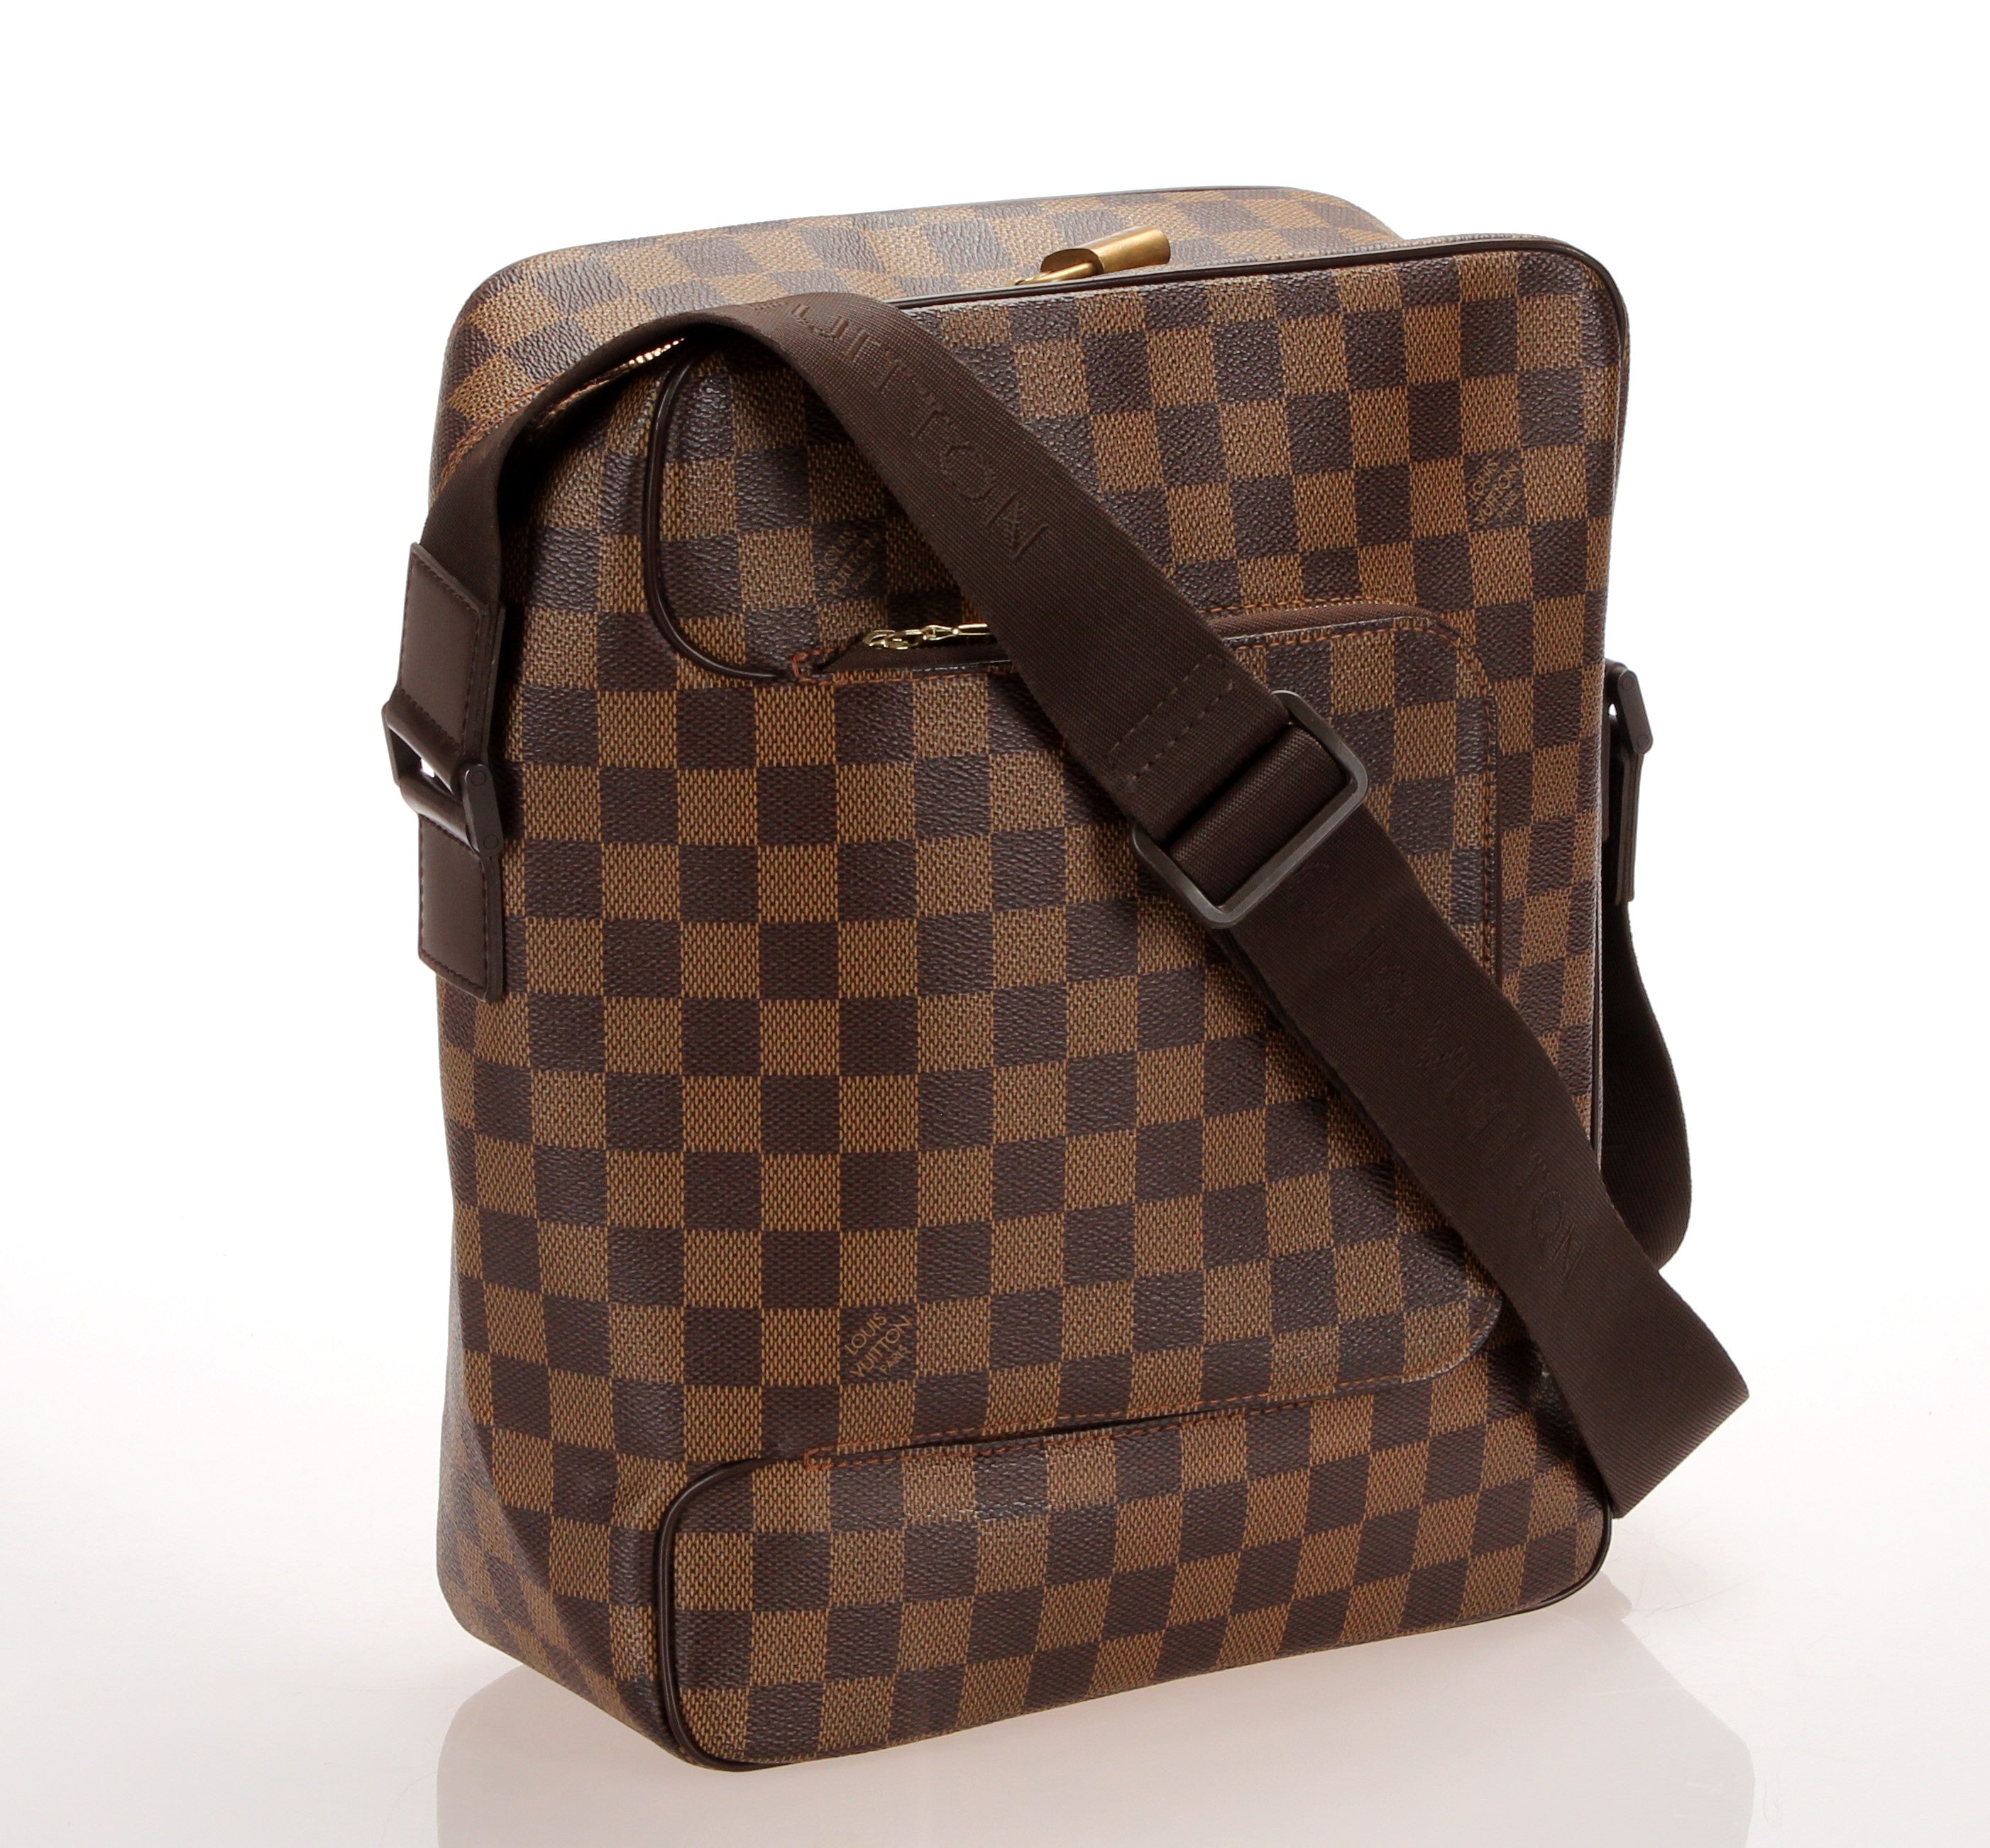 Louis Vuitton Pre-Owned Brown Damier Ebene Olav PM Canvas Crossbody Bag, Best Price and Reviews